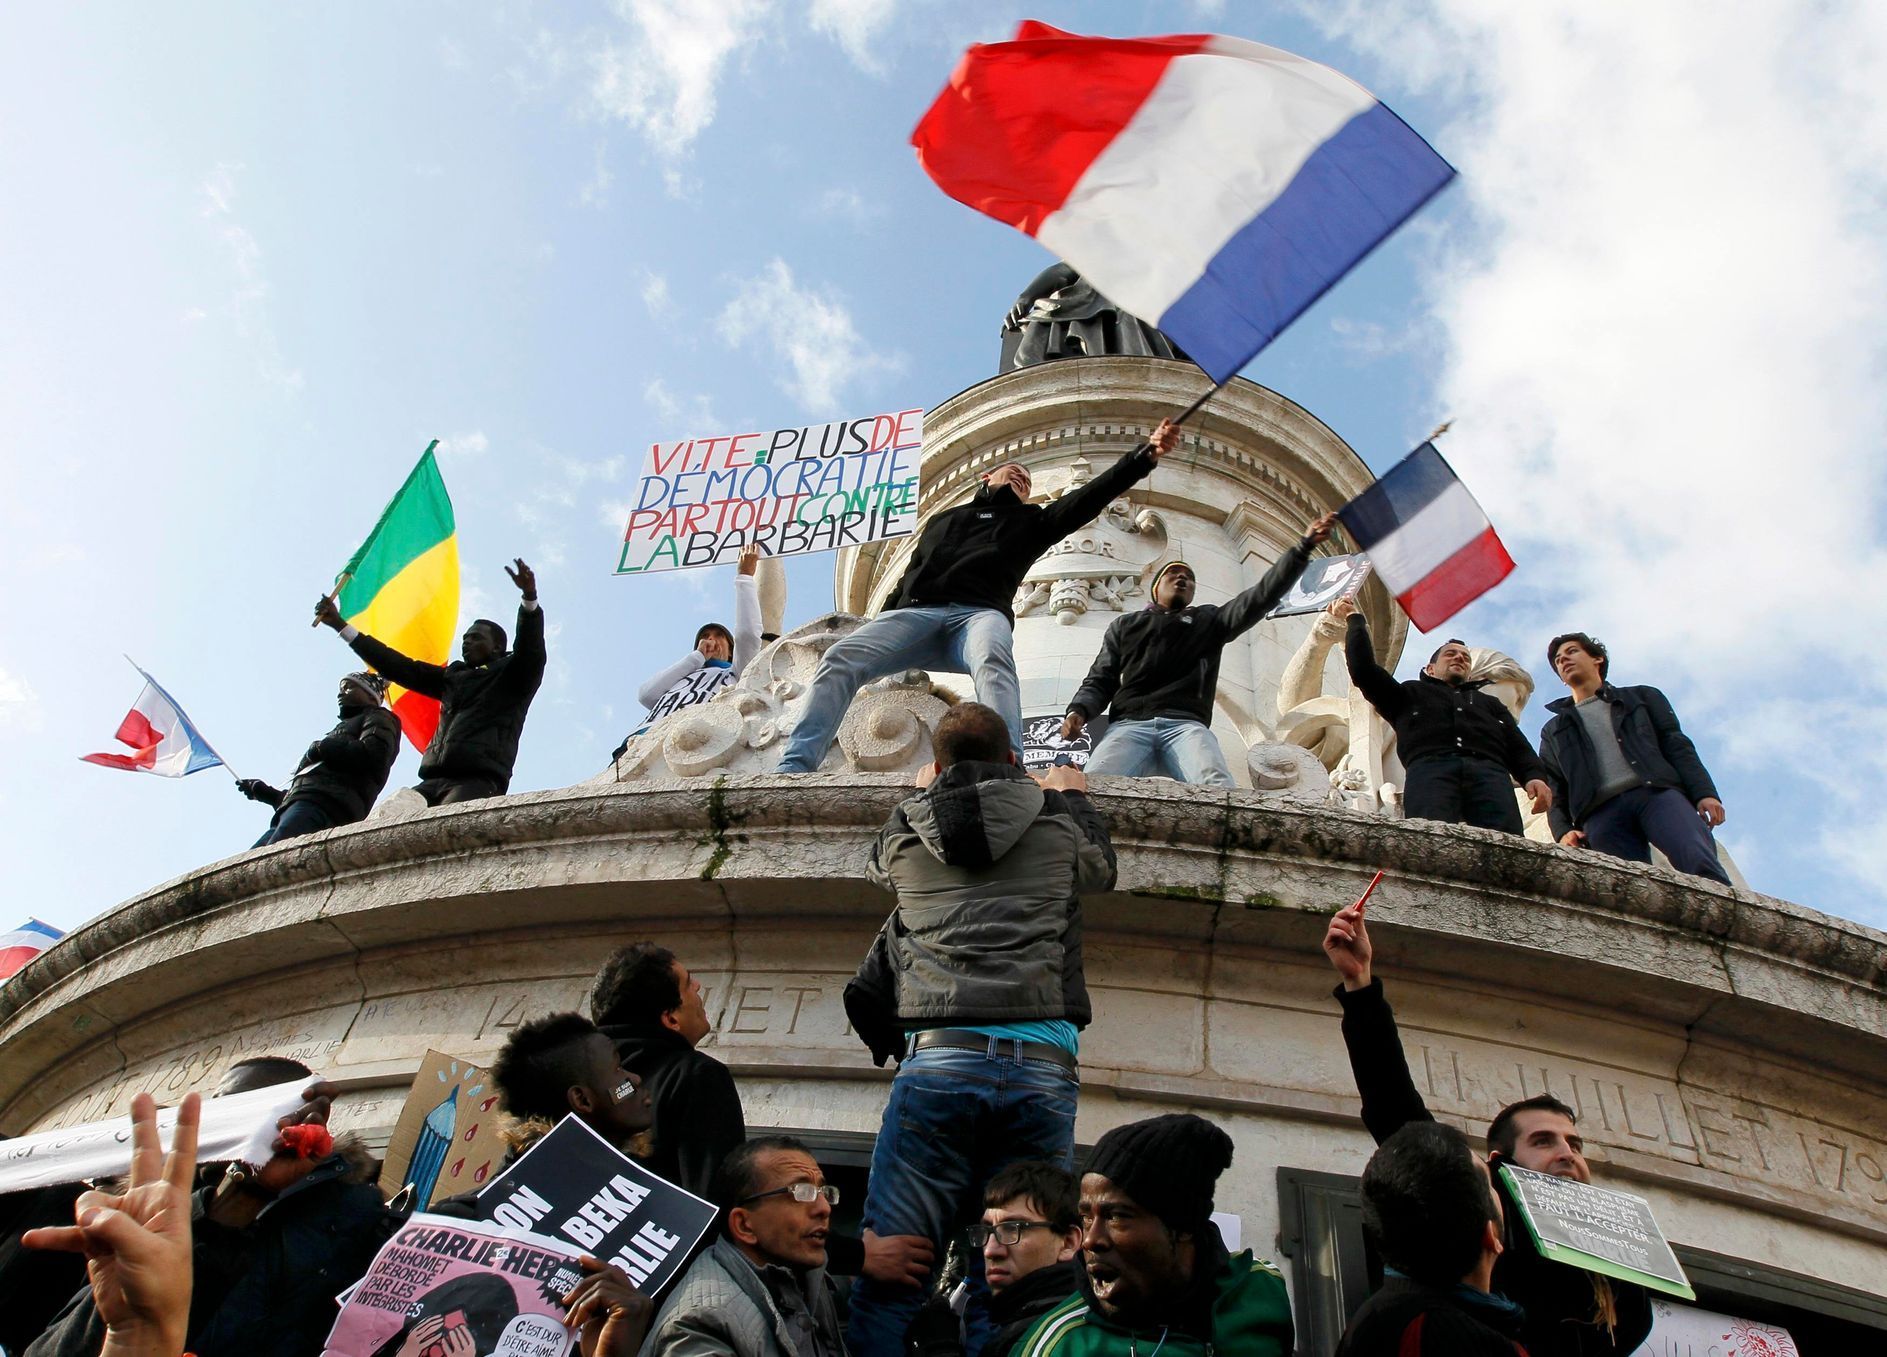 People holding a poster reading &quot;Quick more democracy everywhere against barbarism&quot; take part in a solidarity march (Marche Republicaine) in the streets of Paris